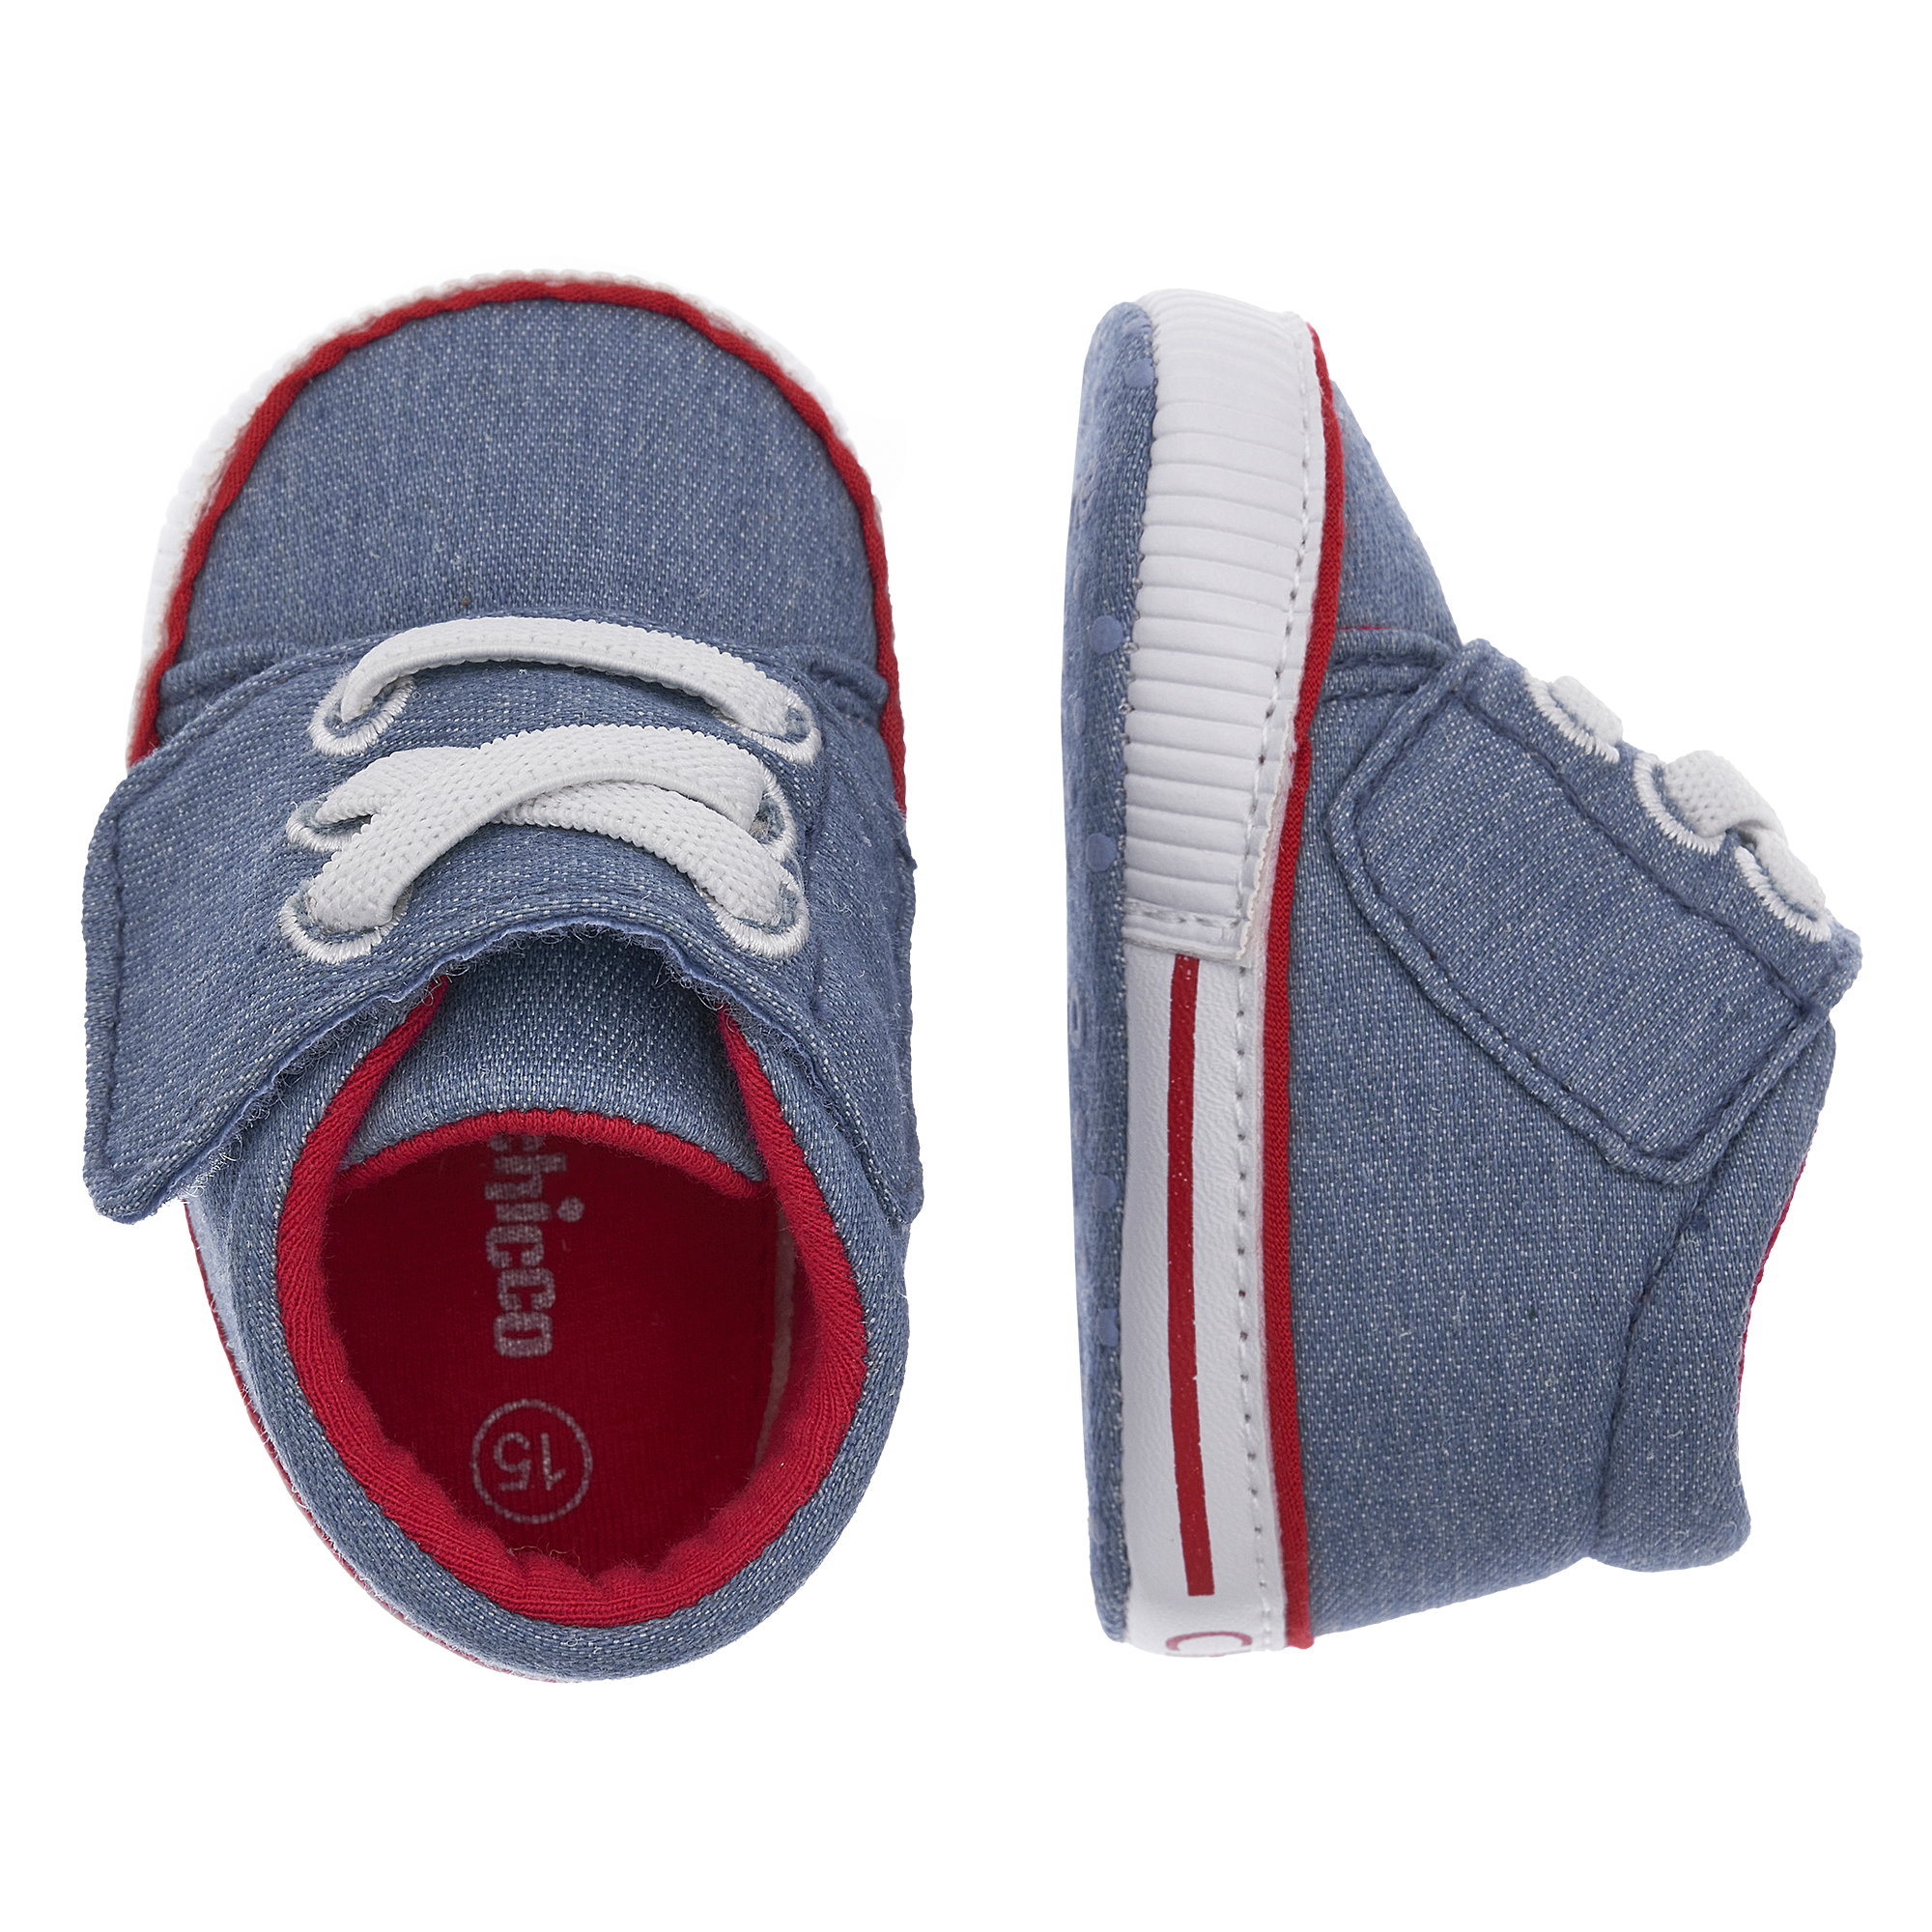 Chicco sneaker nascal - Chicco